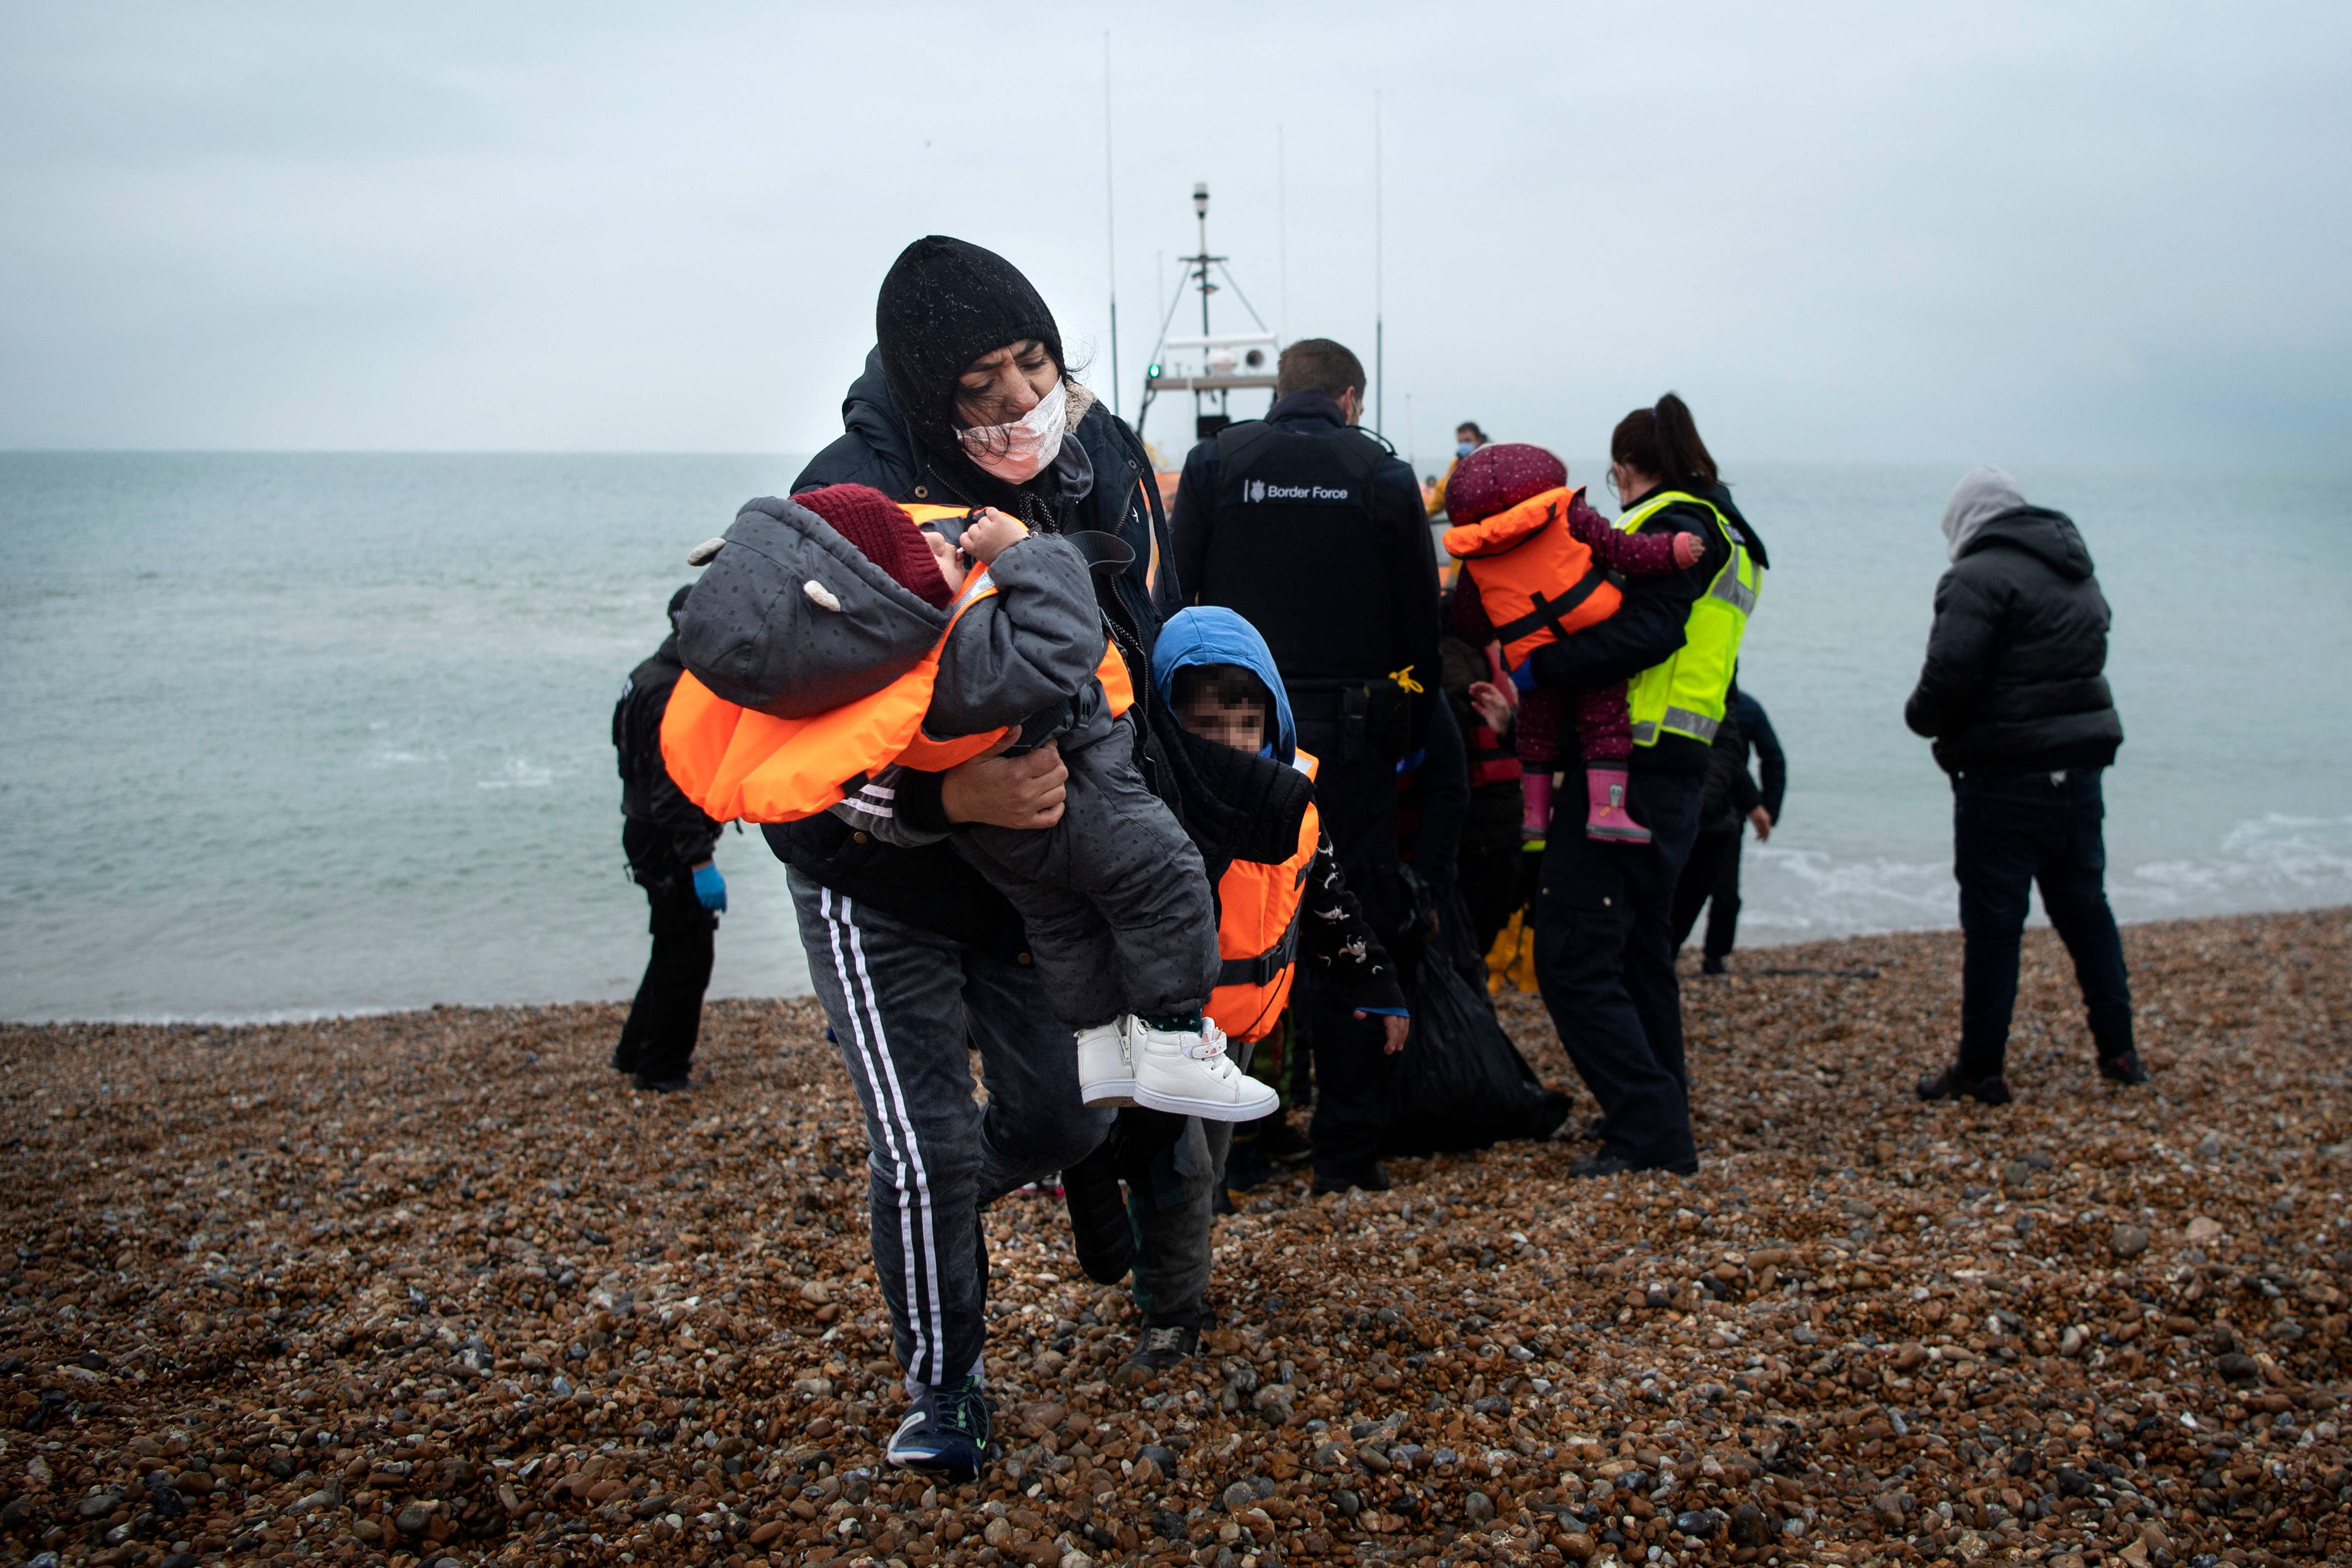 A global humanitarian resettlement scheme seems the only viable alternative to the tragedy of deaths in the Channel